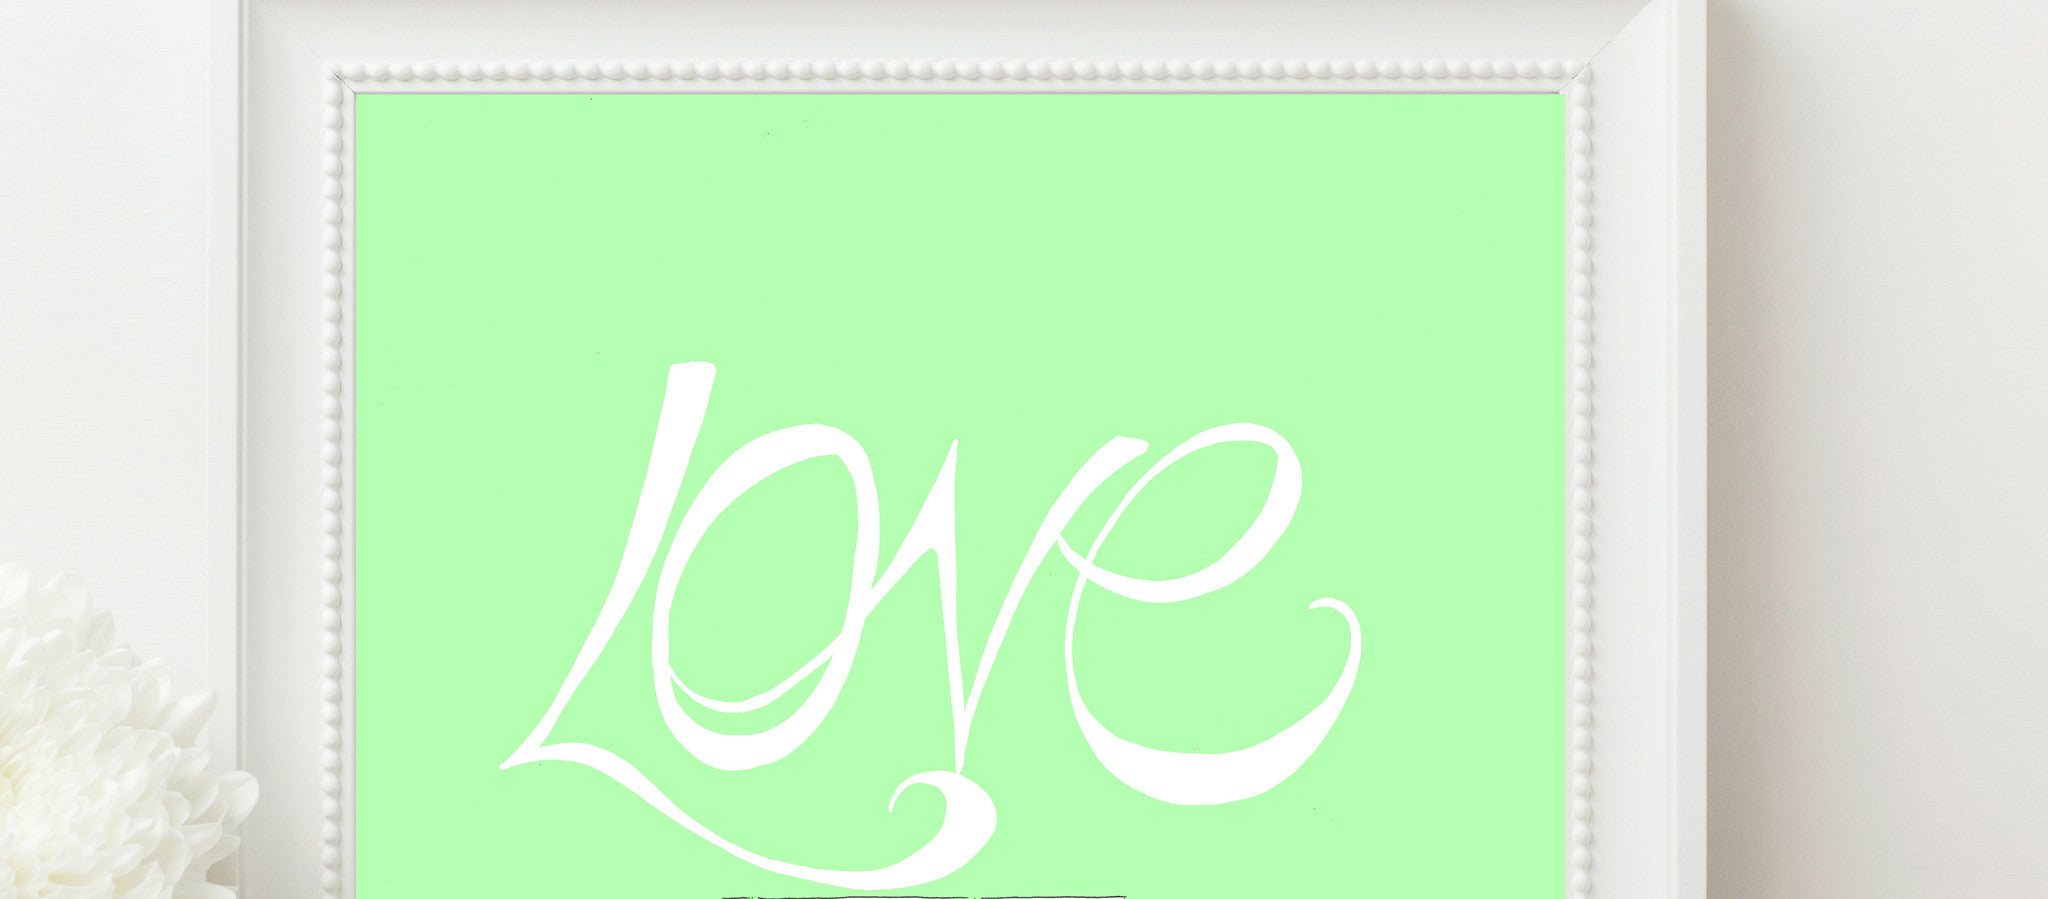 Hand Illustrated Love Print - White on Mint